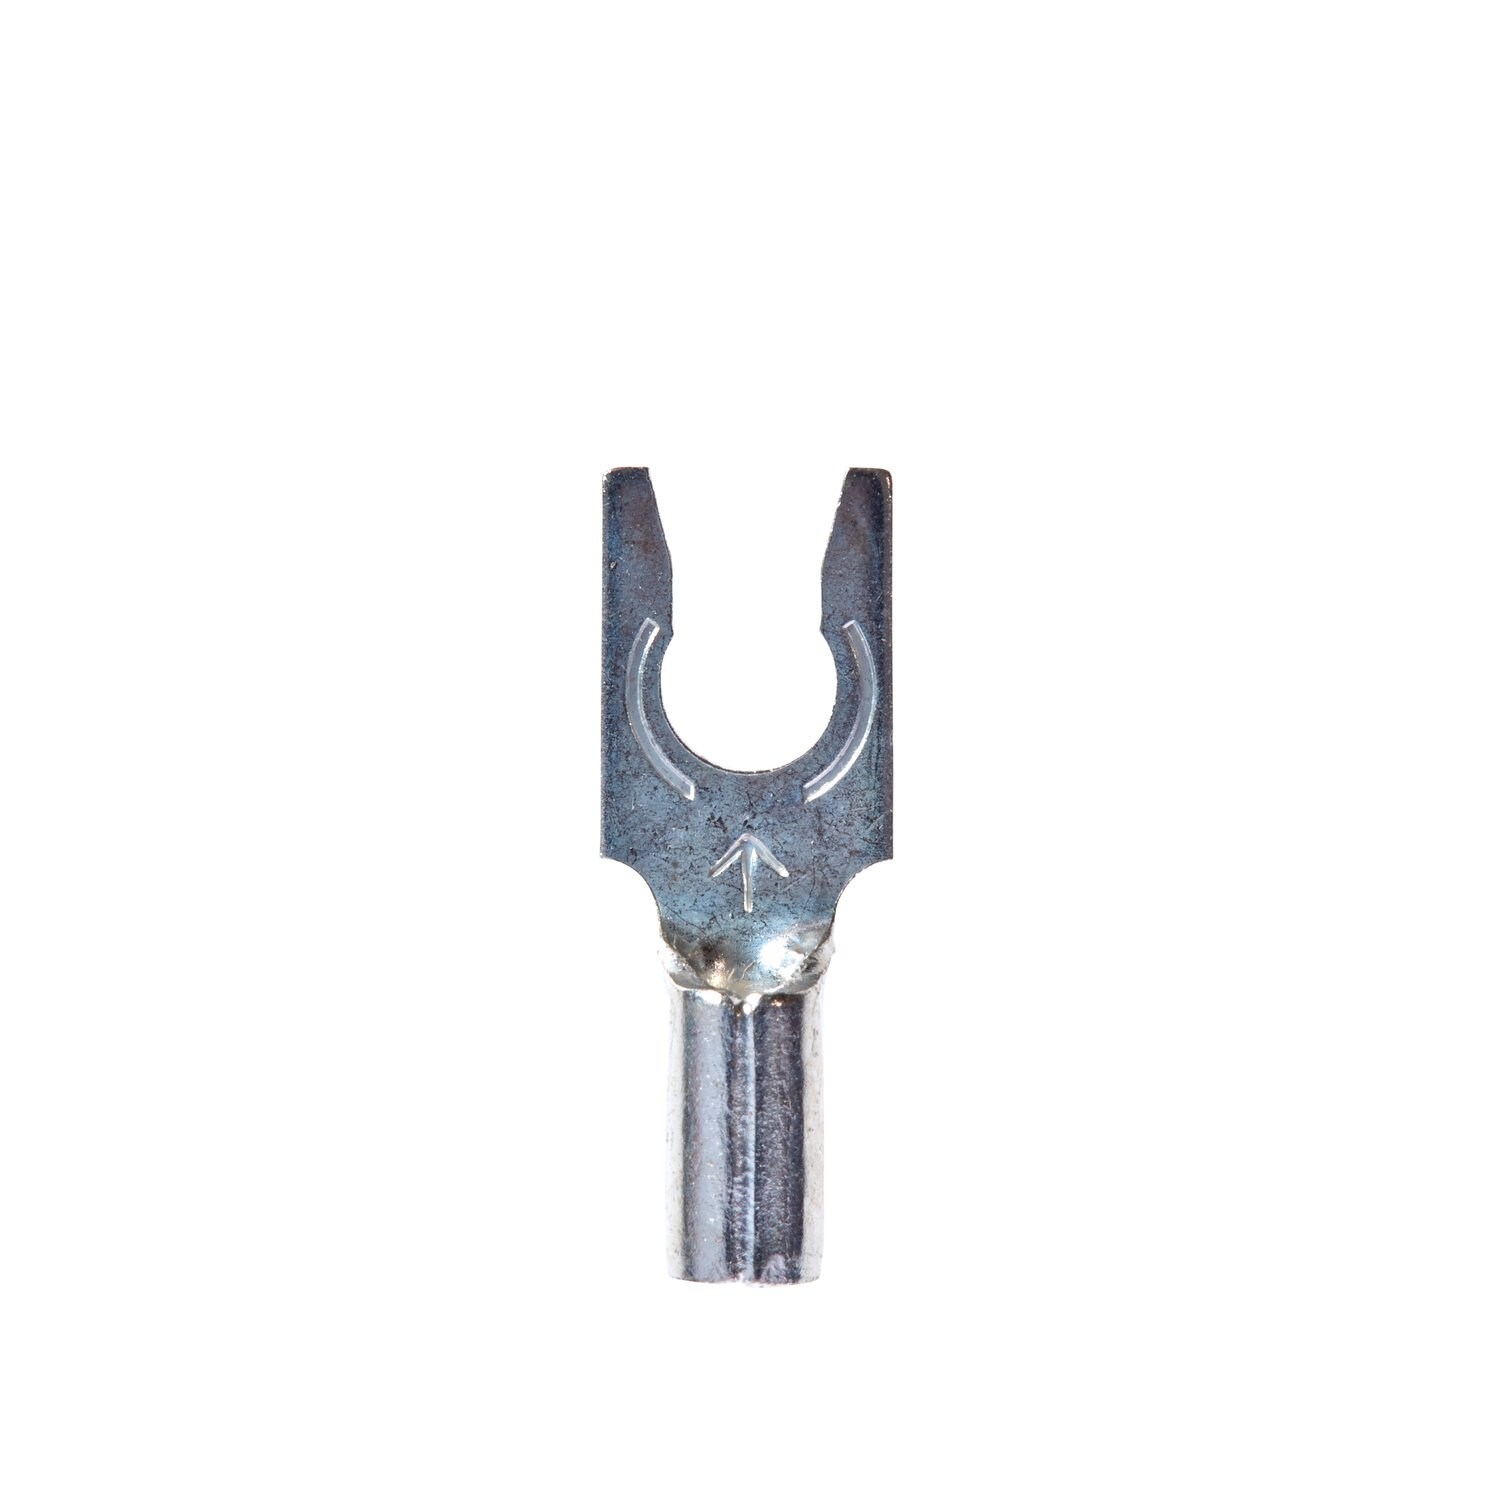 7100165272 - 3M Scotchlok Locking Fork Non-Insulated, 100/bottle, M18-6FLX,
spring-like tongue firmly fits around the stud, 500/Case